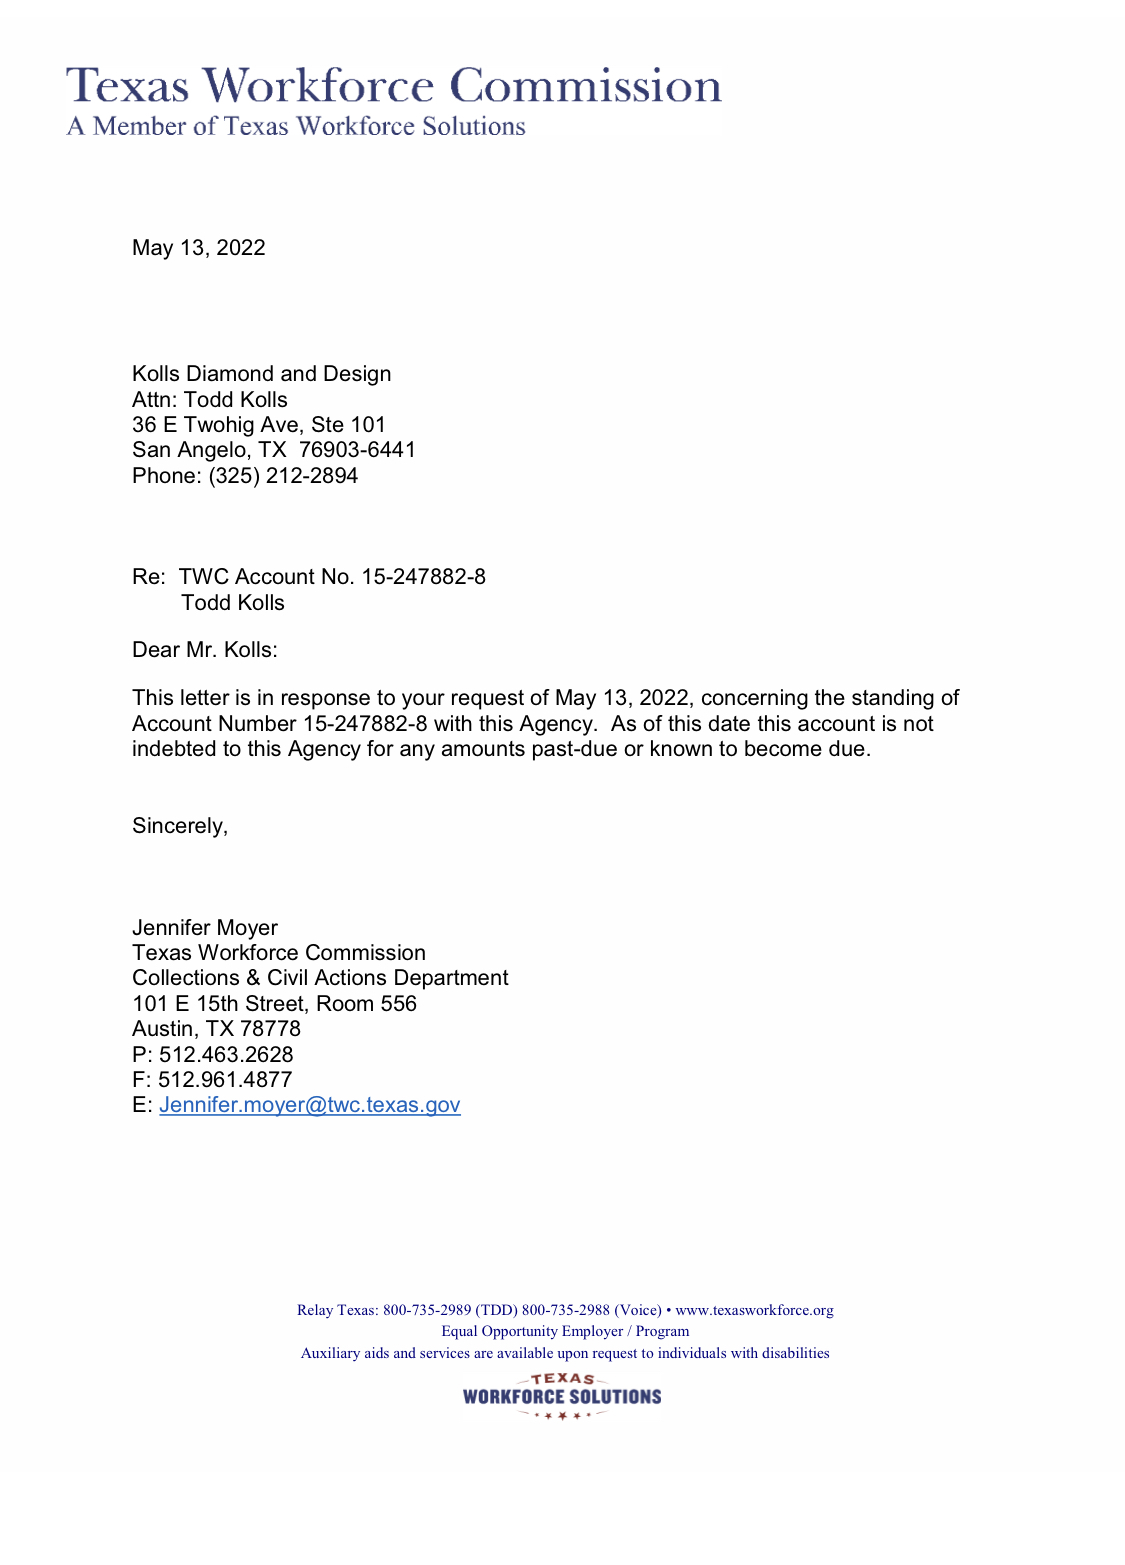 Letter of good standing with TWC